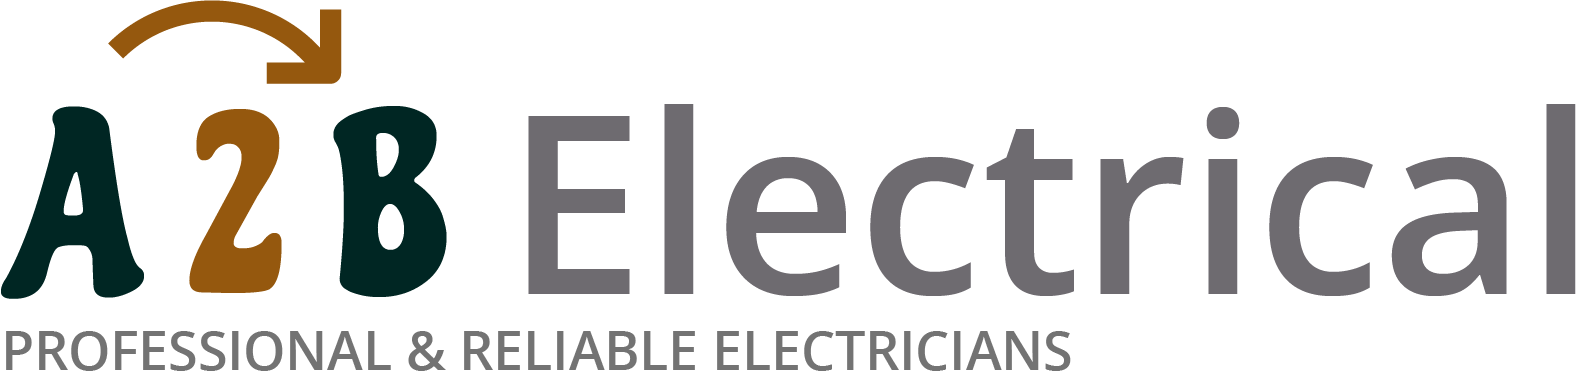 If you have electrical wiring problems in Bangor, we can provide an electrician to have a look for you. 